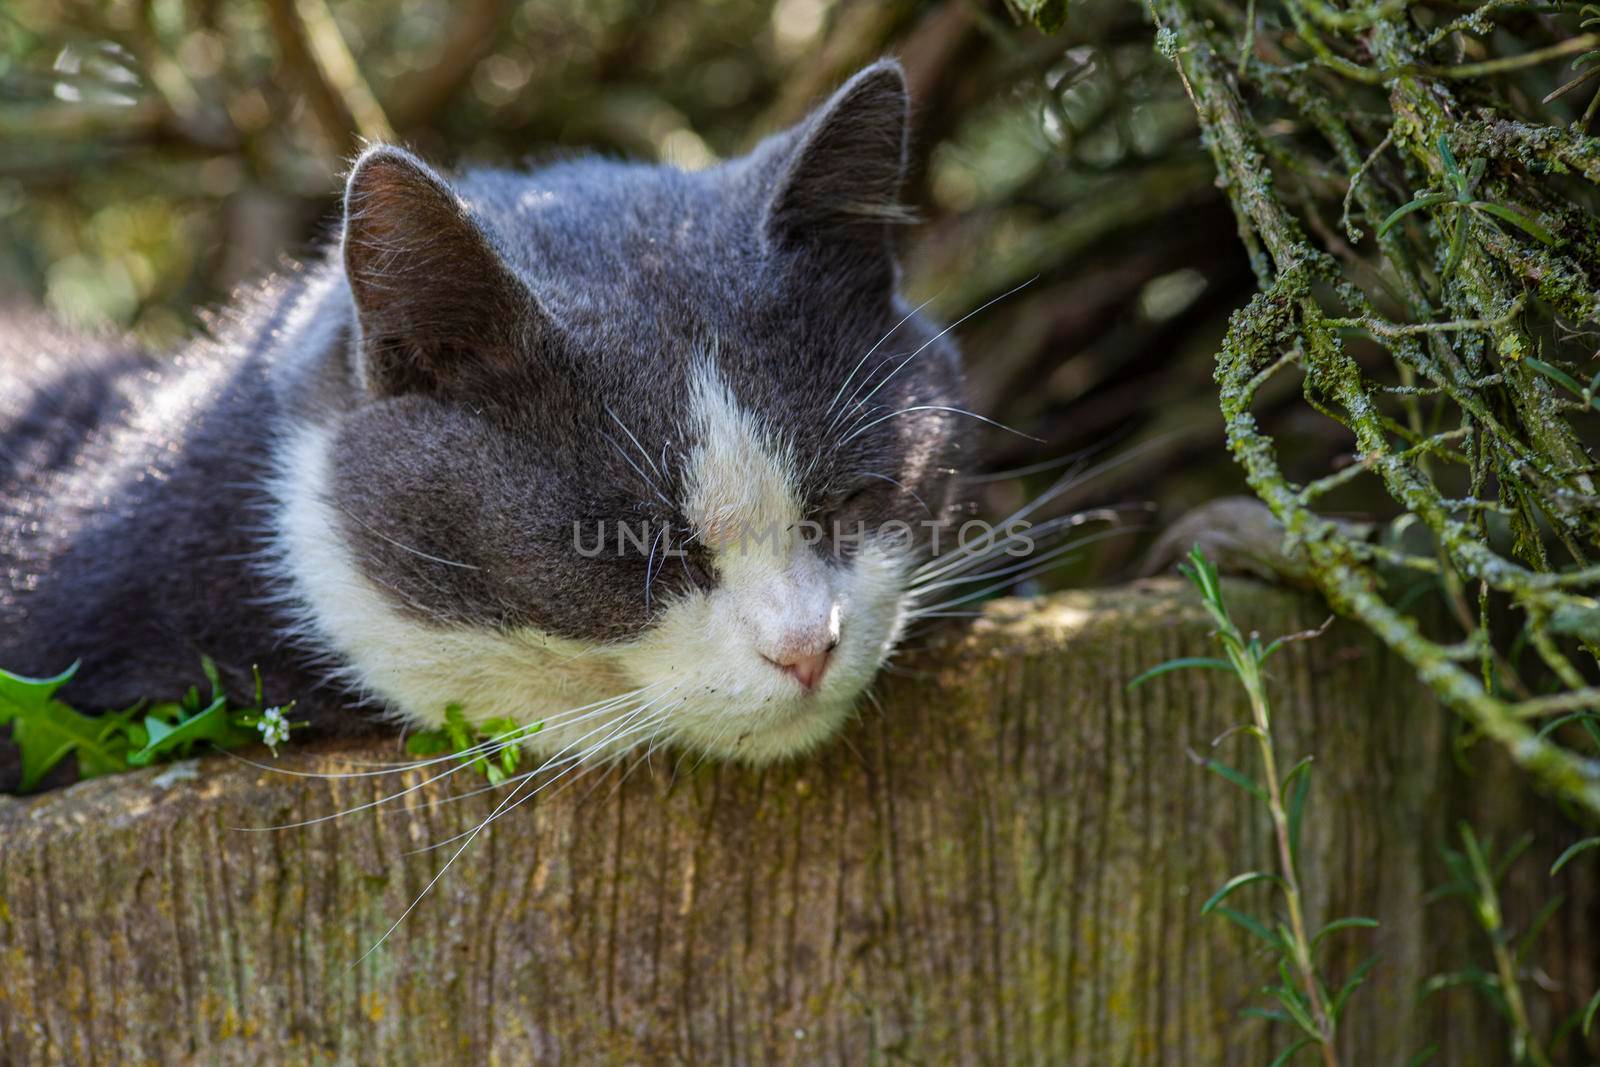 Cute cat sleeps nestled among the plants 4 by pippocarlot